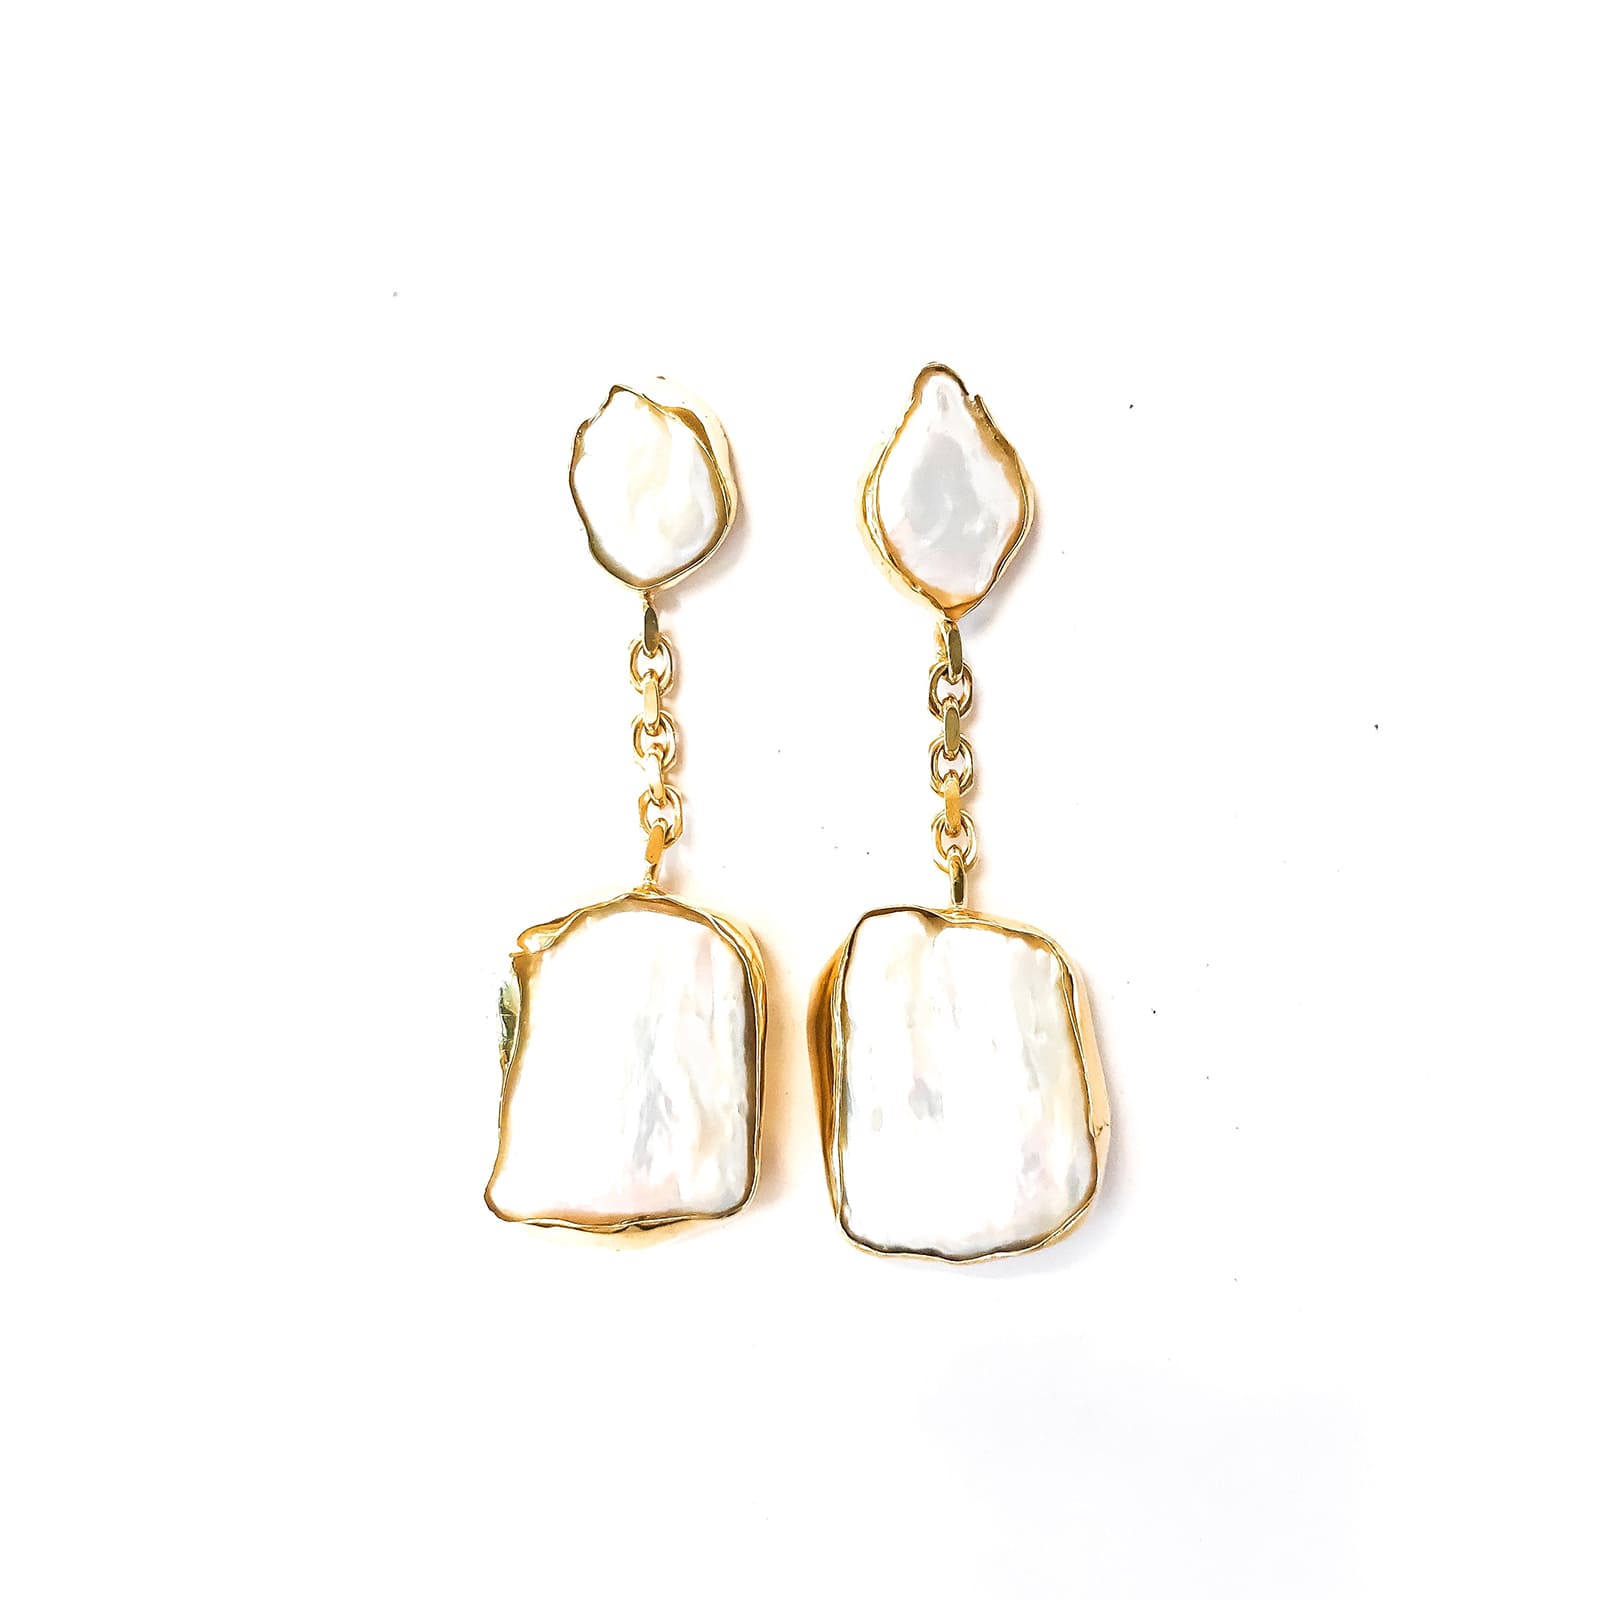 Frame Baroques gold plated silver earrings, front view.